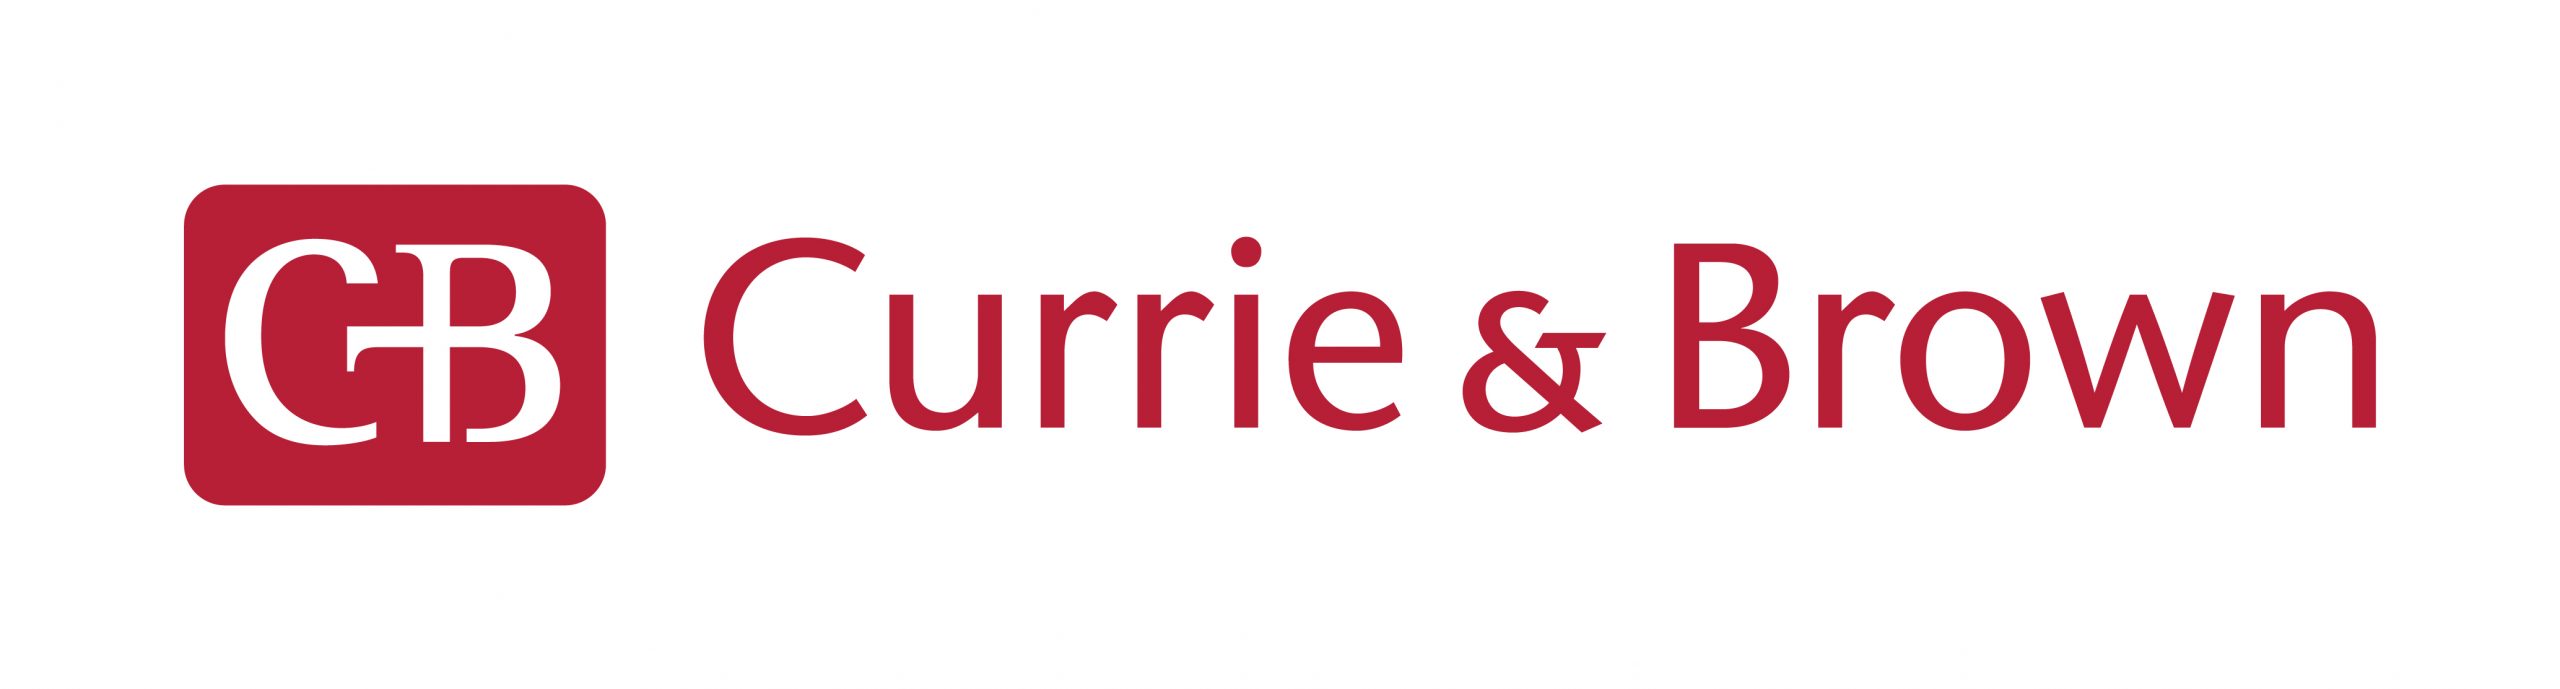 currie-brown-brown-logo-profile